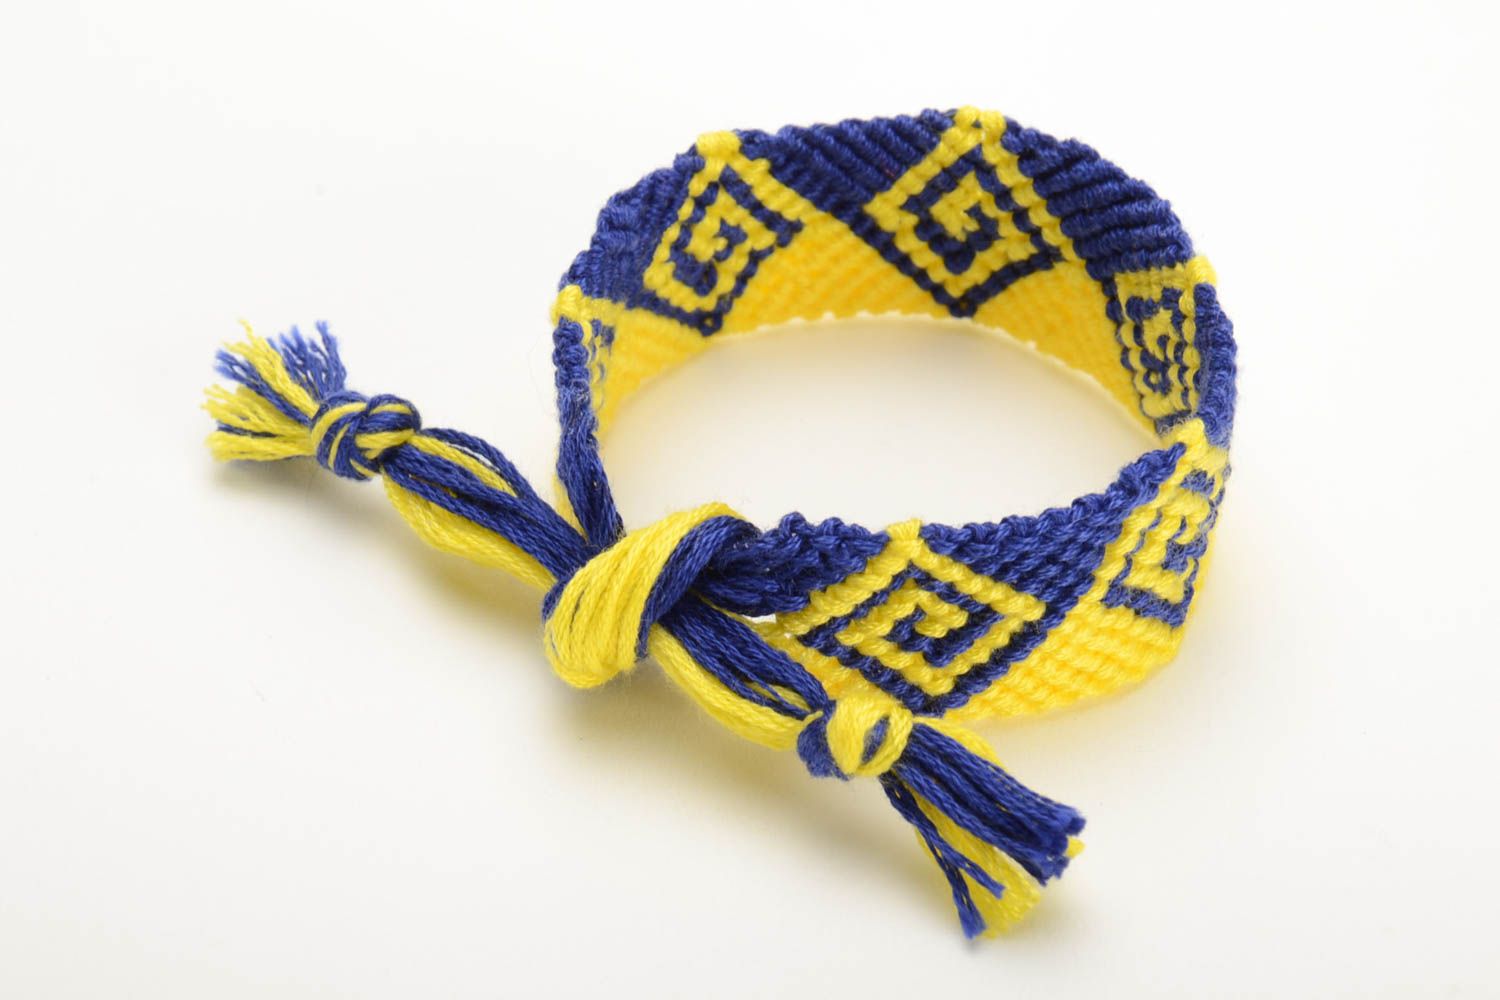 Handmade wide friendship wrist bracelet woven of yellow and blue embroidery floss photo 3